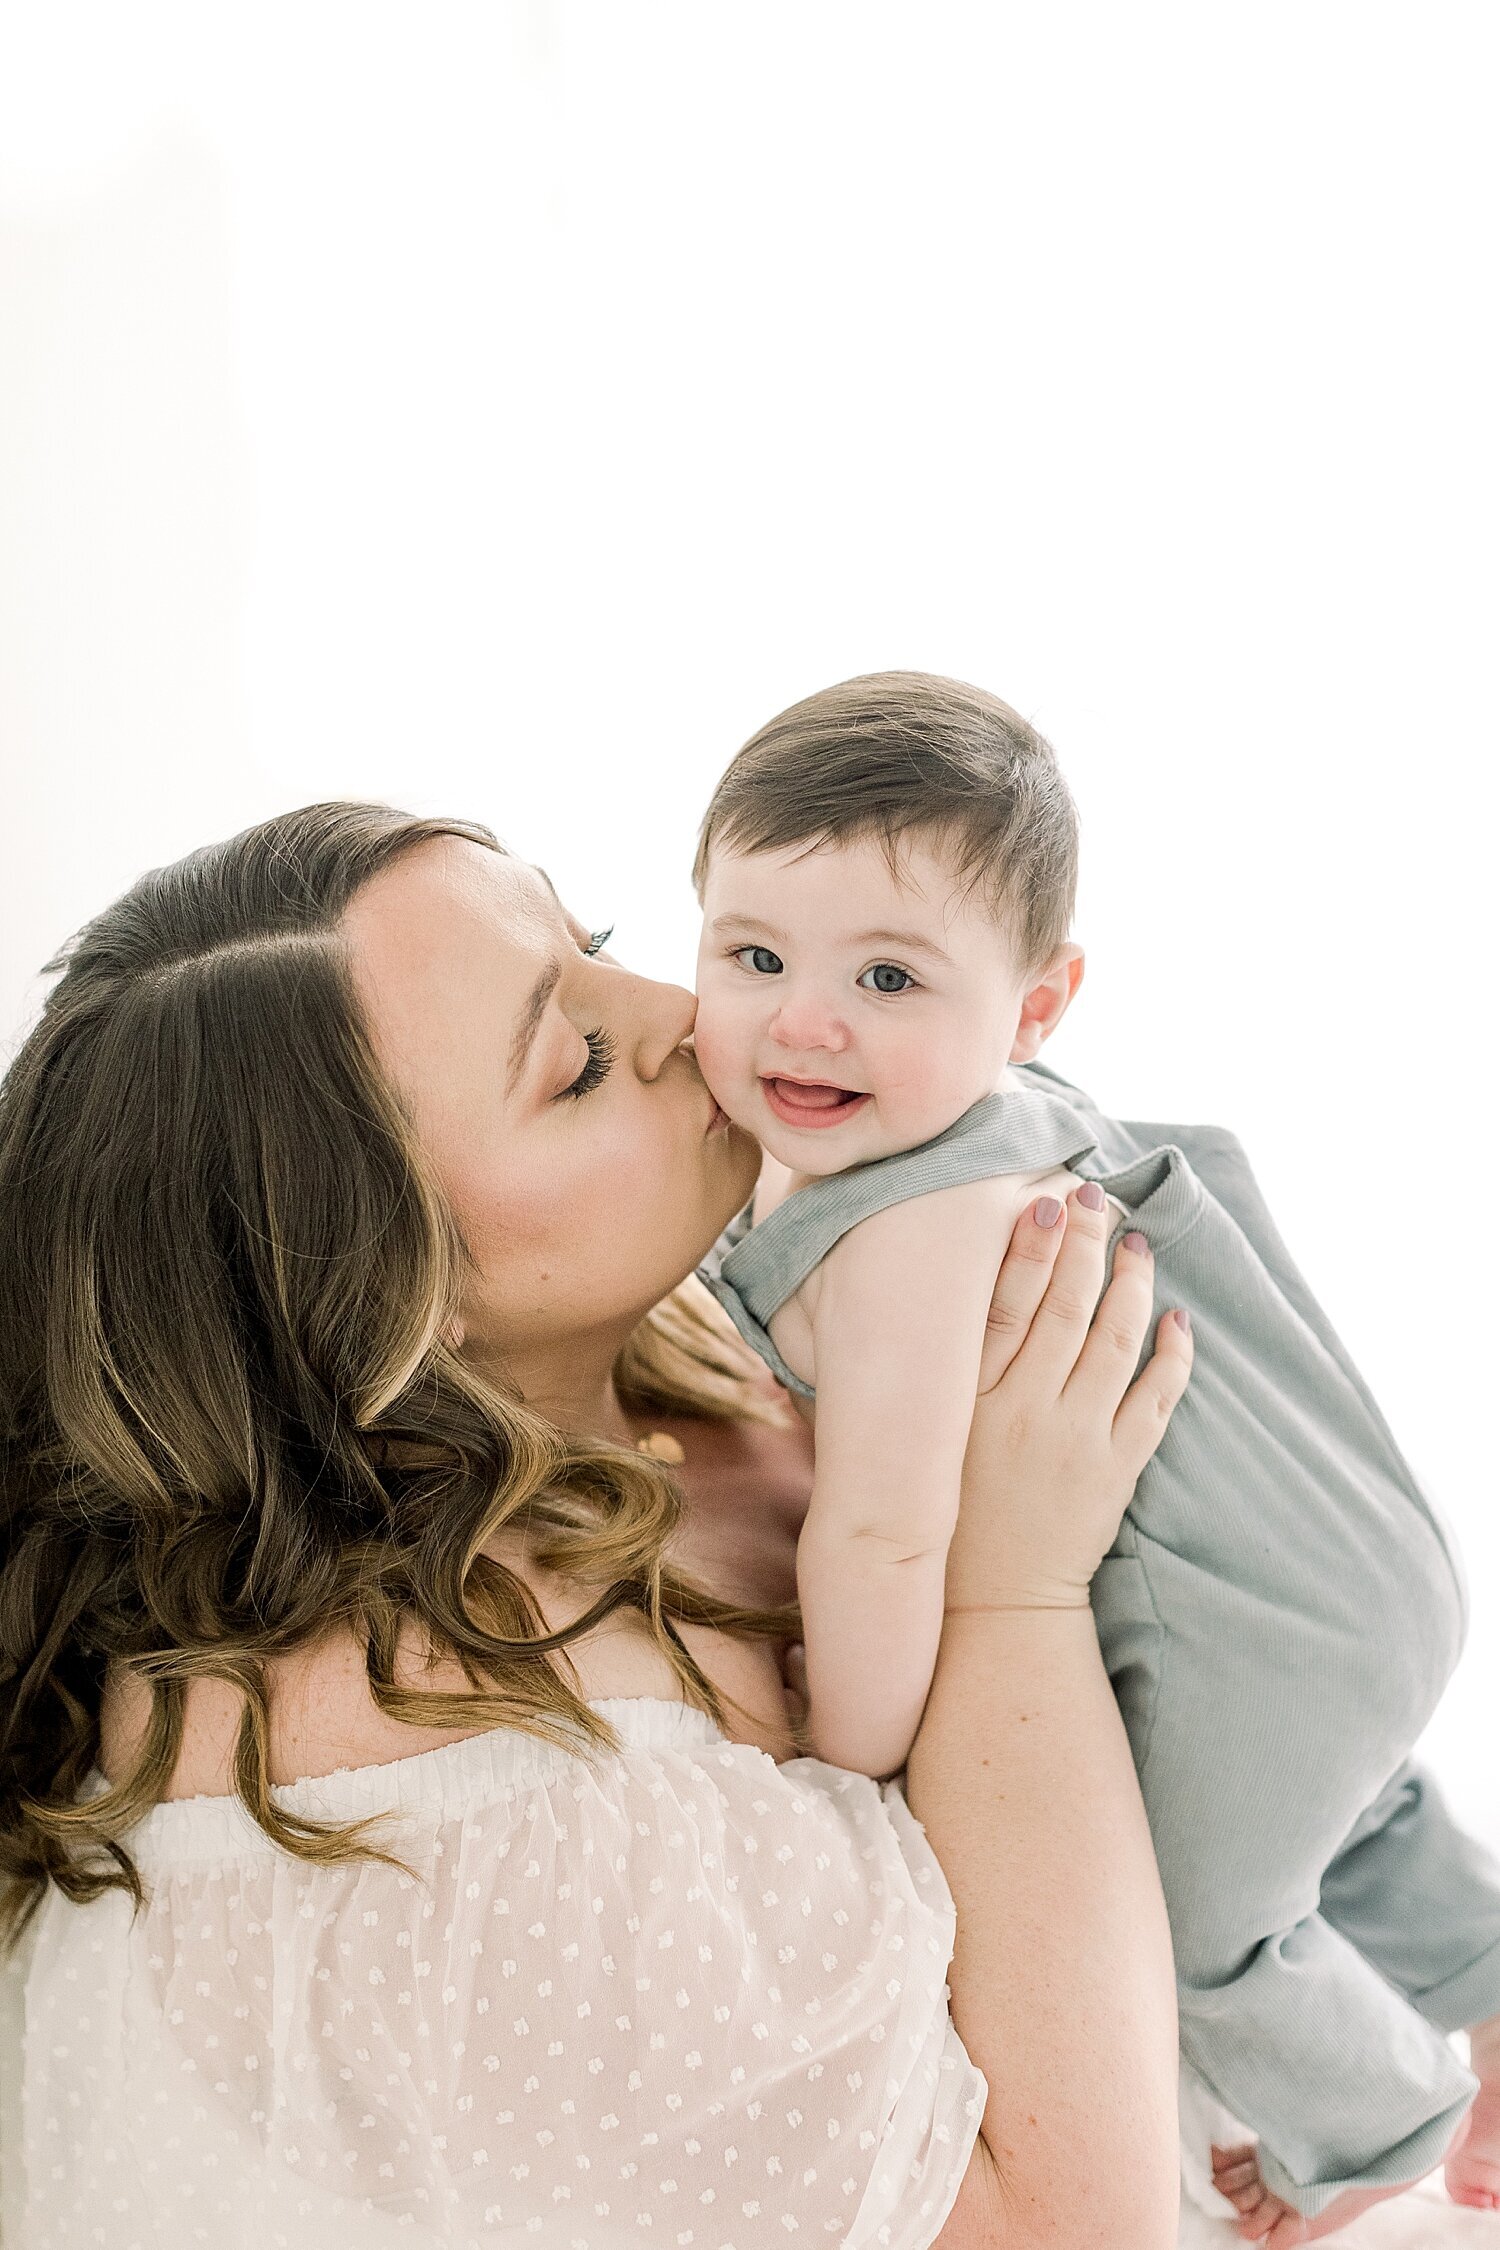 Mom kissing her baby boy during photoshoot with Ambre Williams Photography.